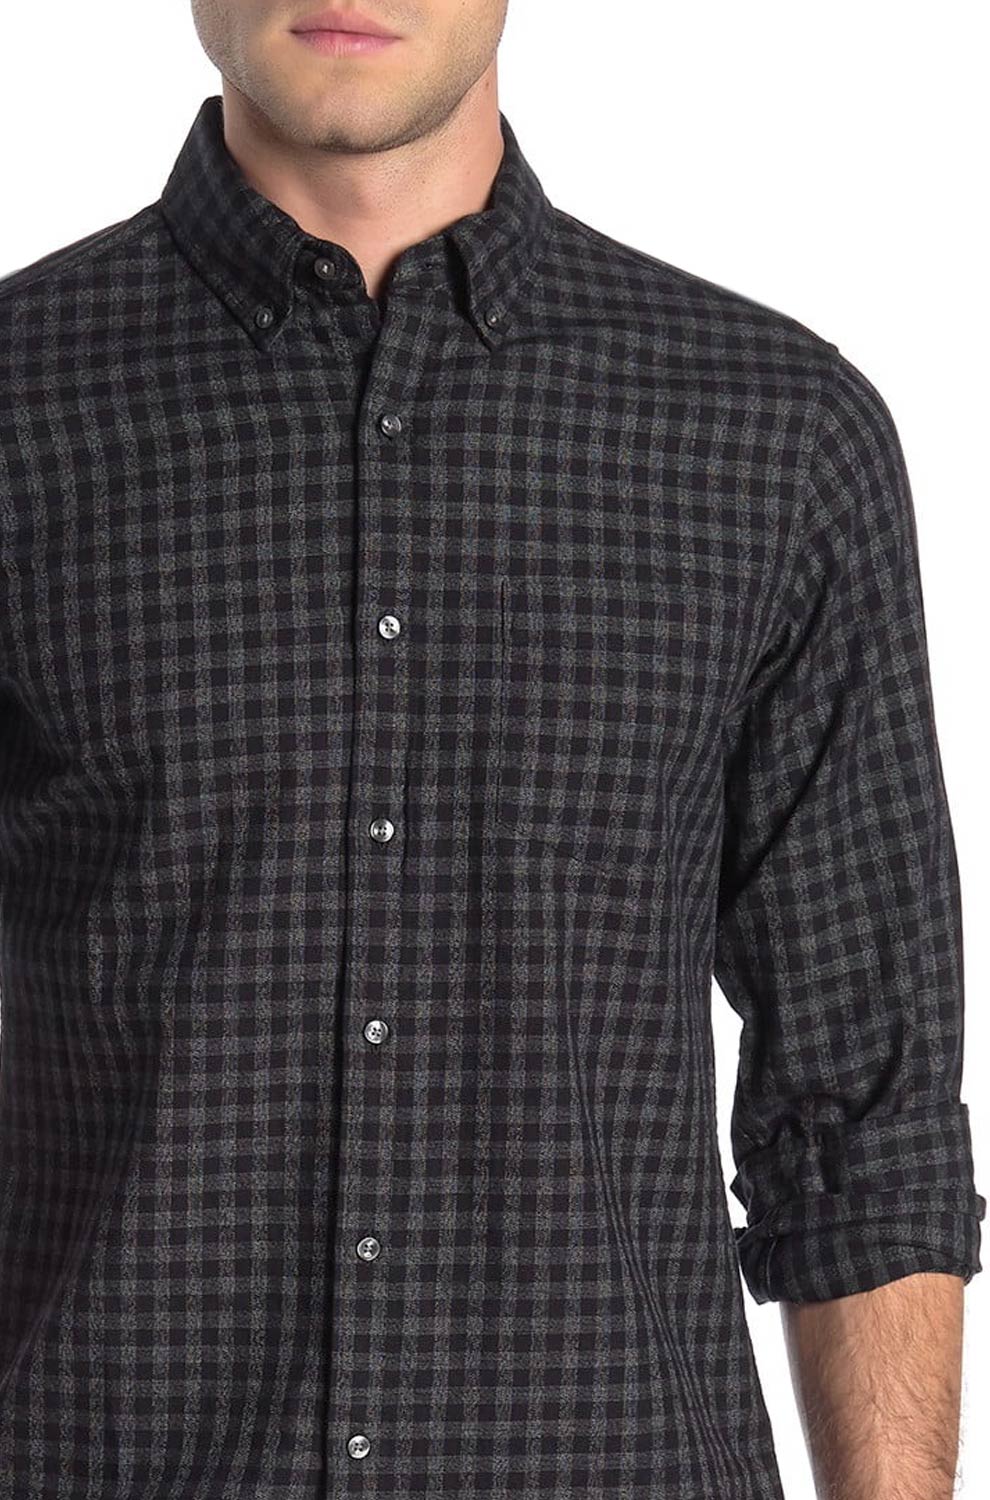 woocommerce-673321-2209615.cloudwaysapps.com-michael-kors-mens-black-checked-slim-fit-long-sleeves-button-down-shirt